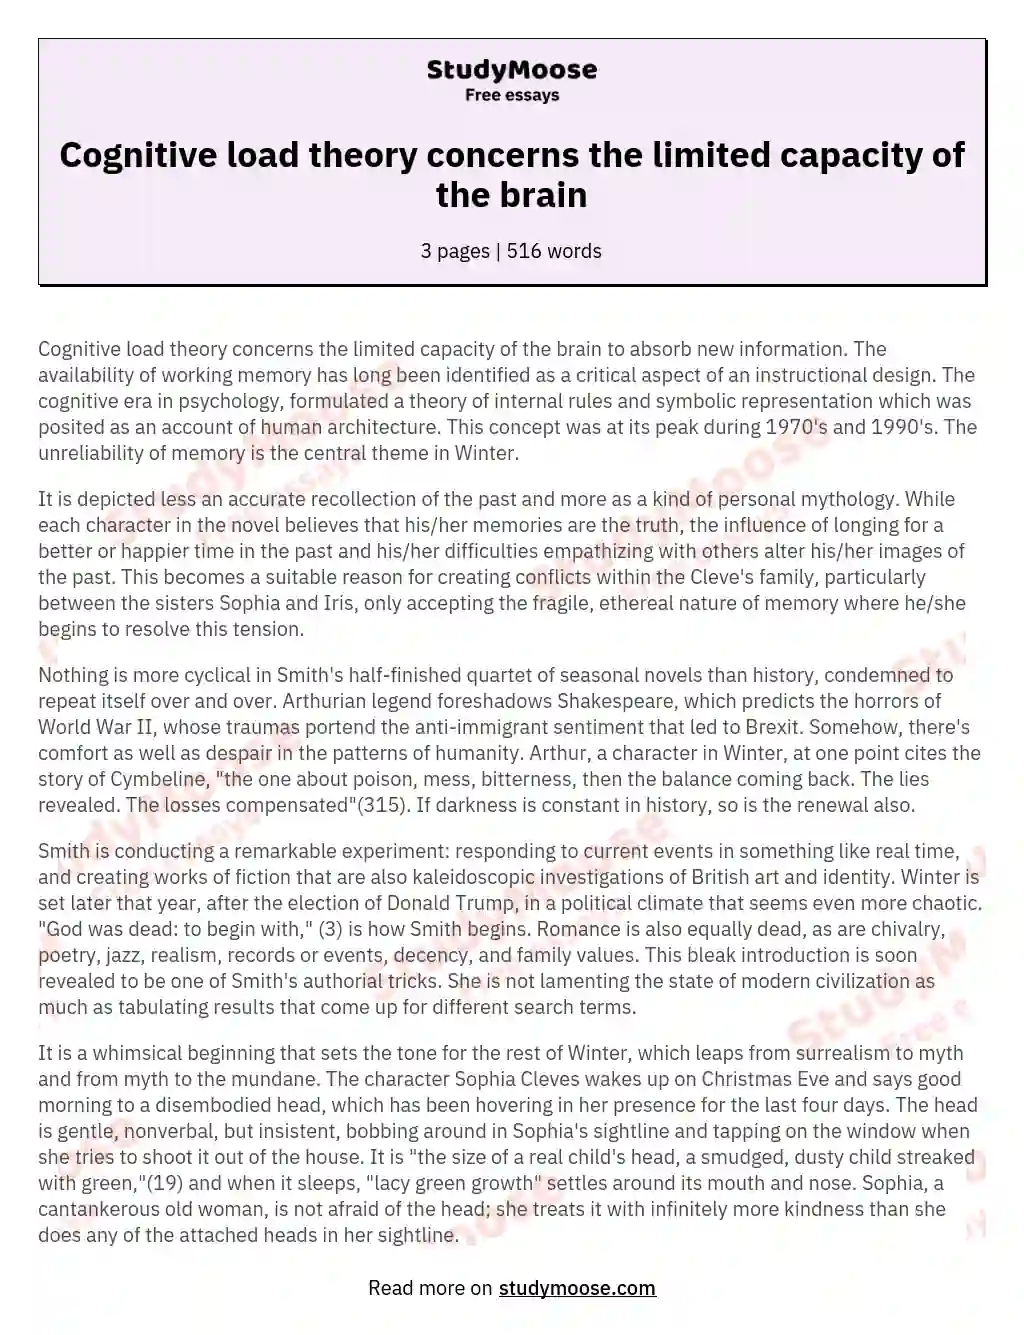 Cognitive load theory concerns the limited capacity of the brain essay